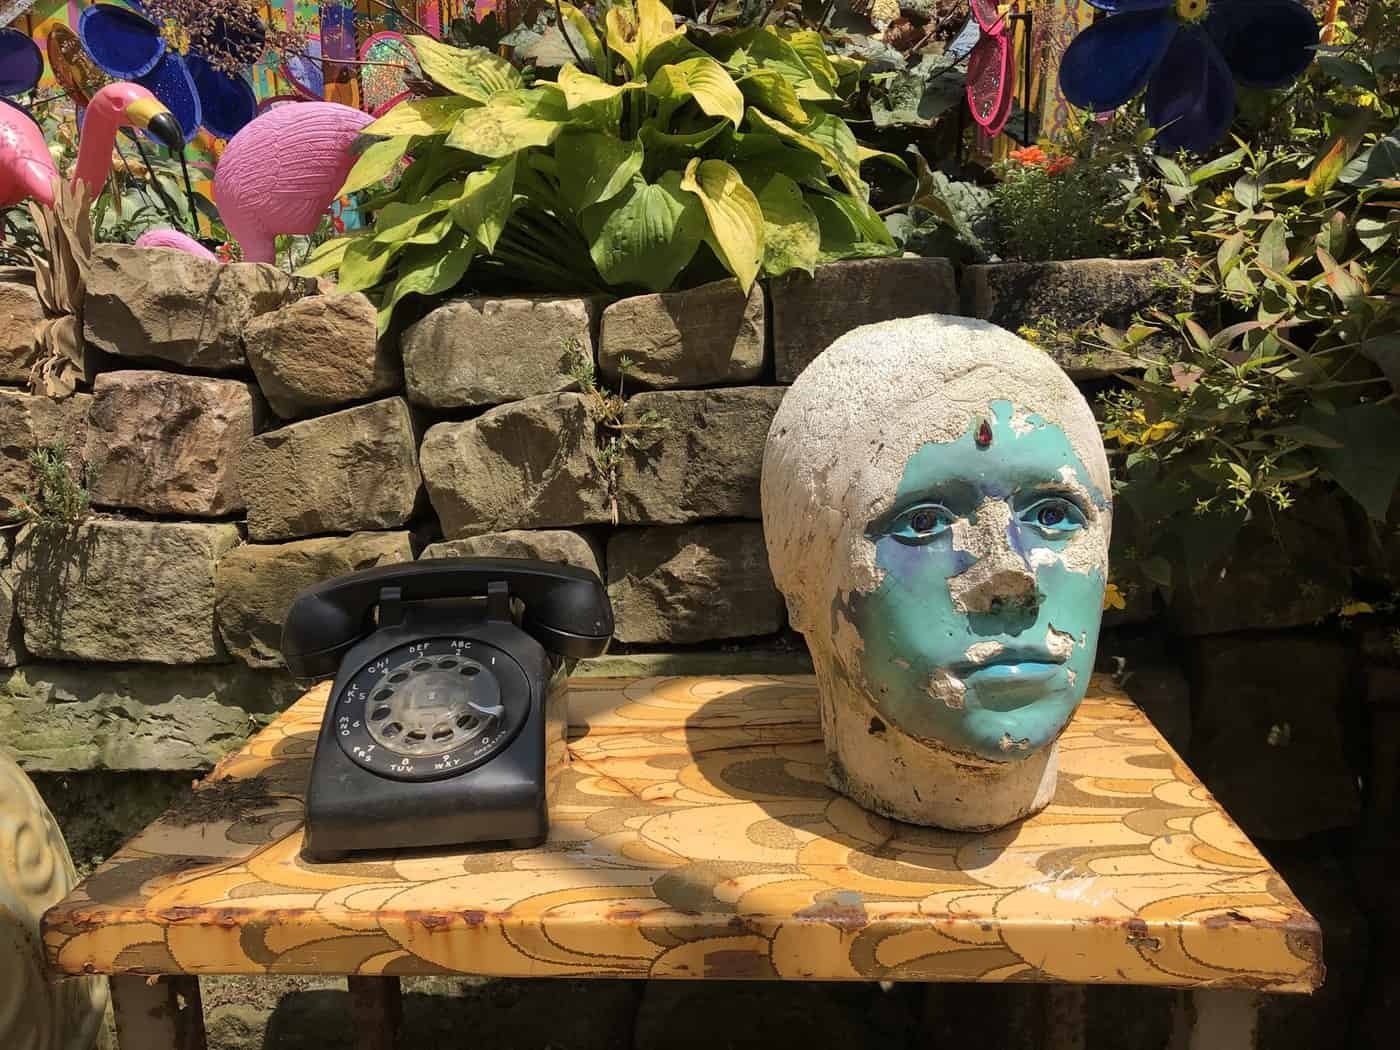 Wooden table with old rotary telephone and statue head with paint peeling off